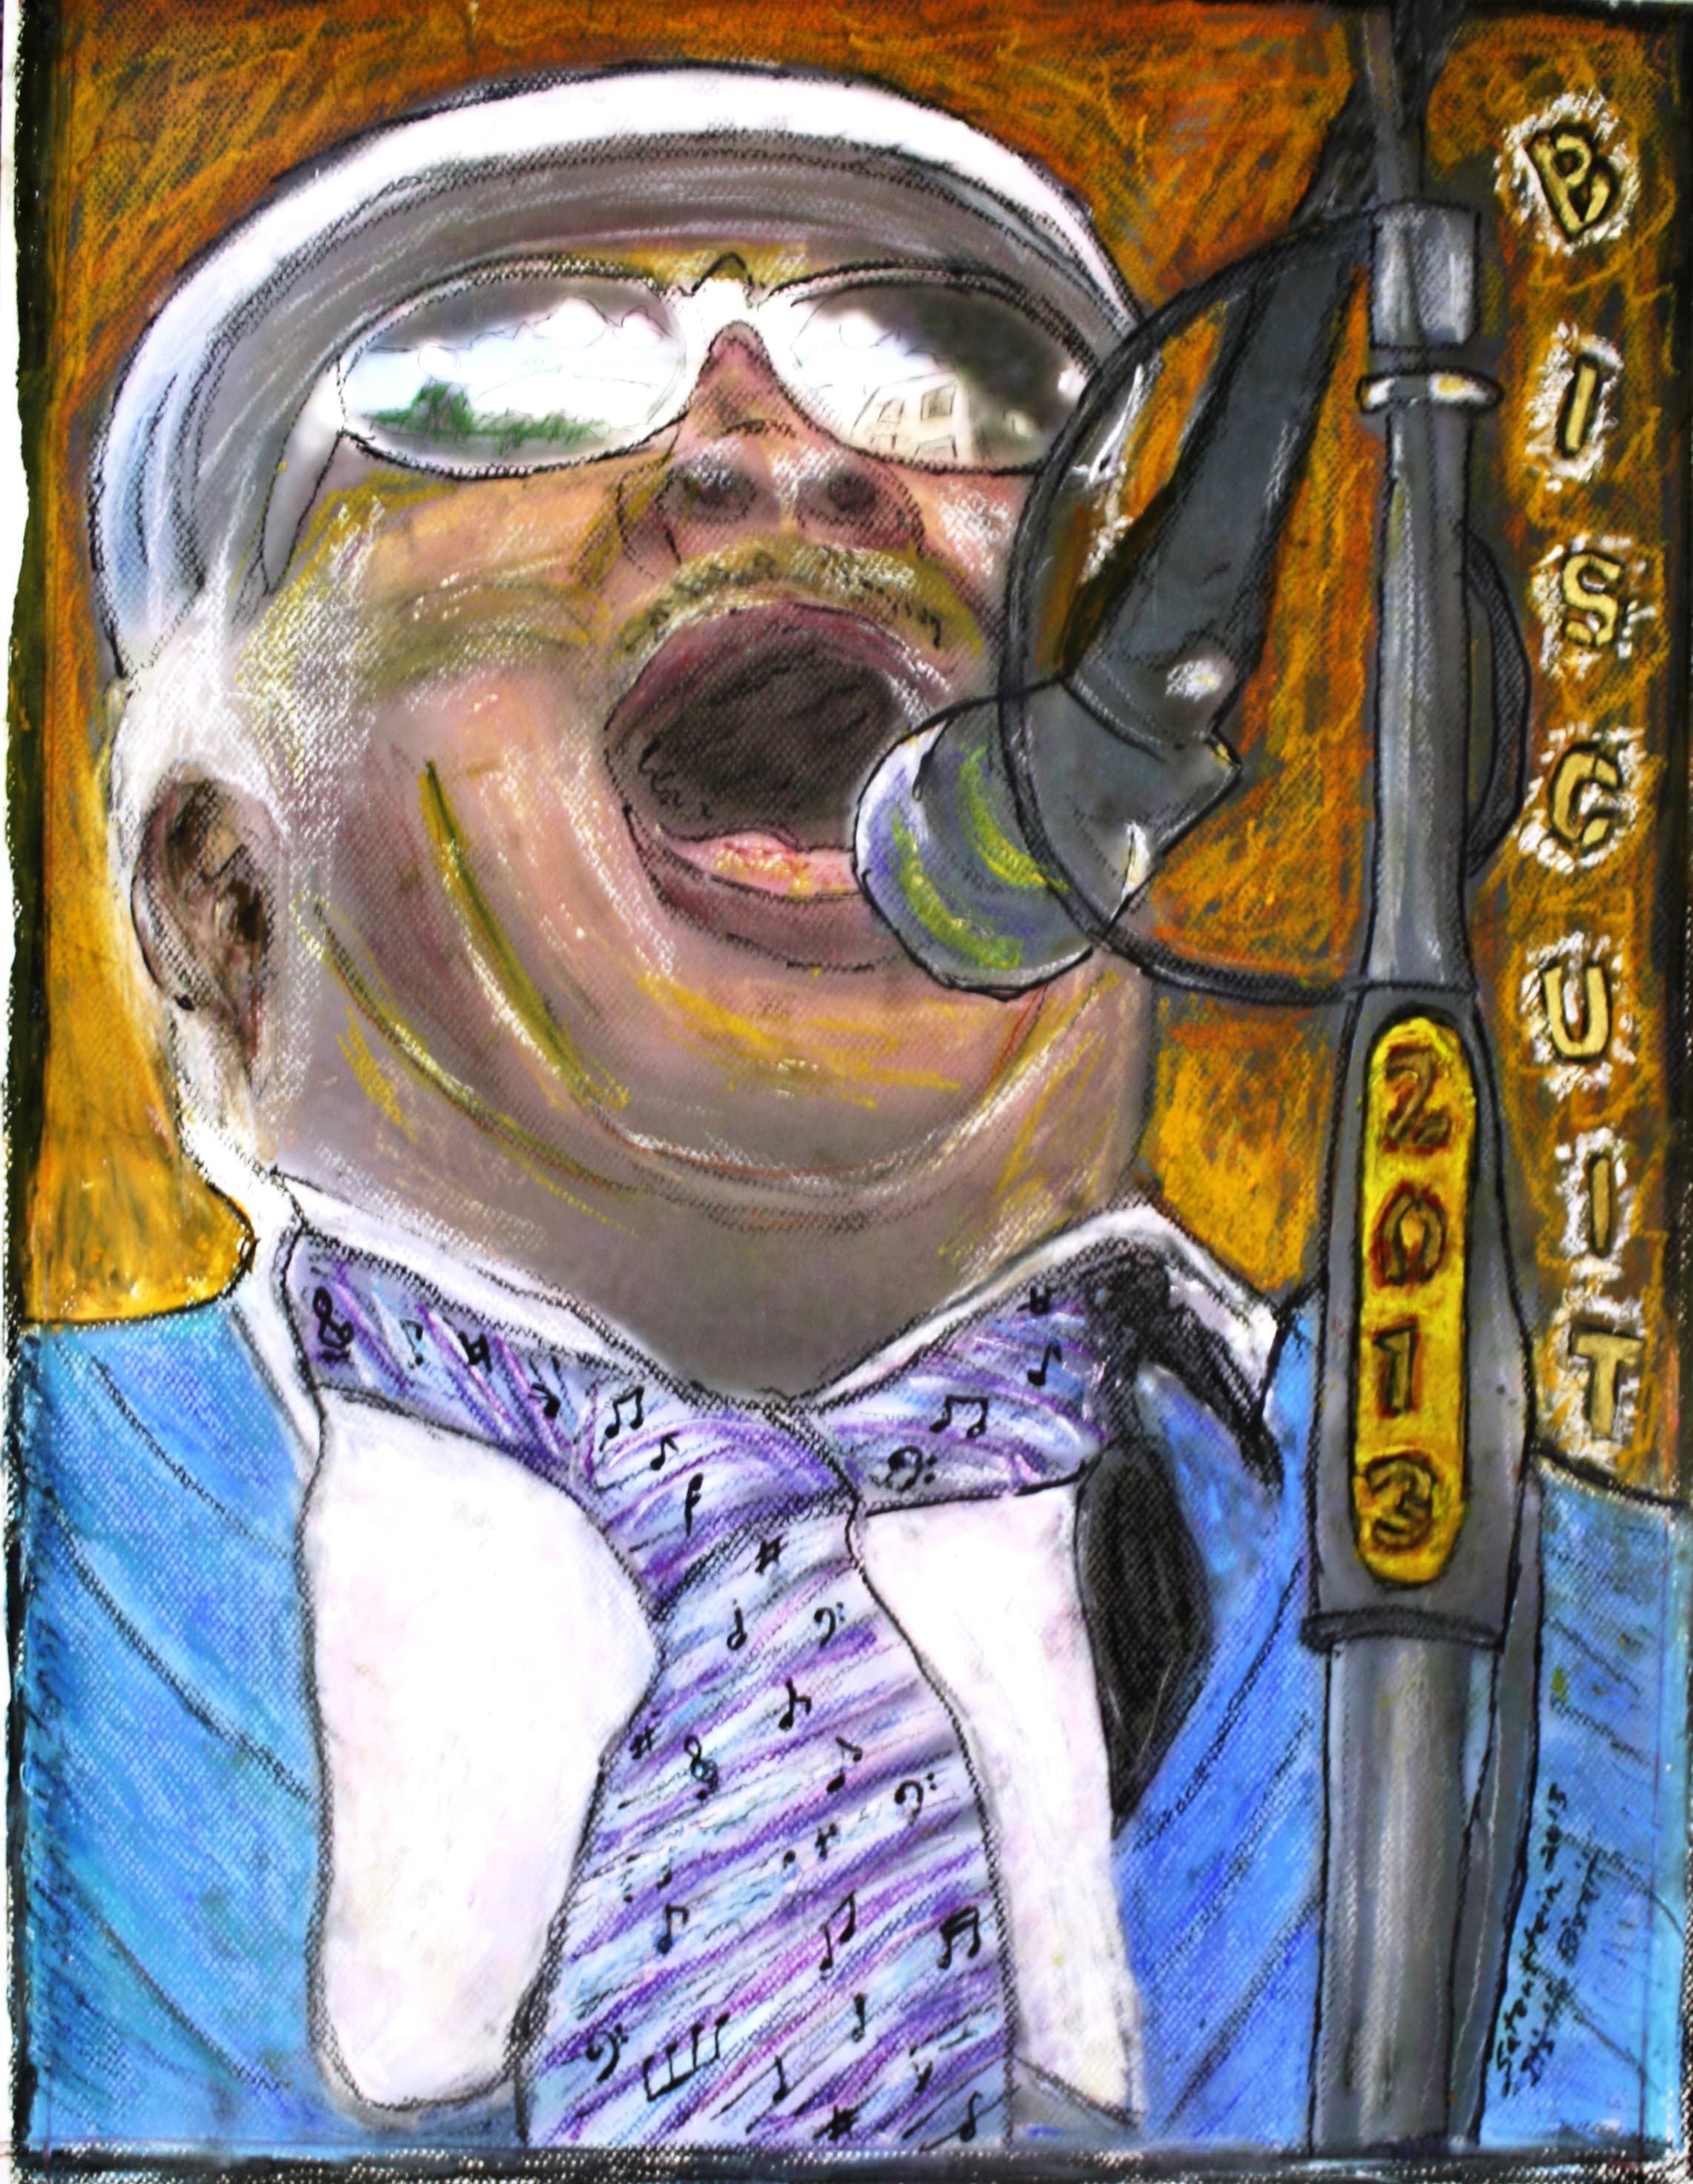 man singing into microphone with tie and sunglasses